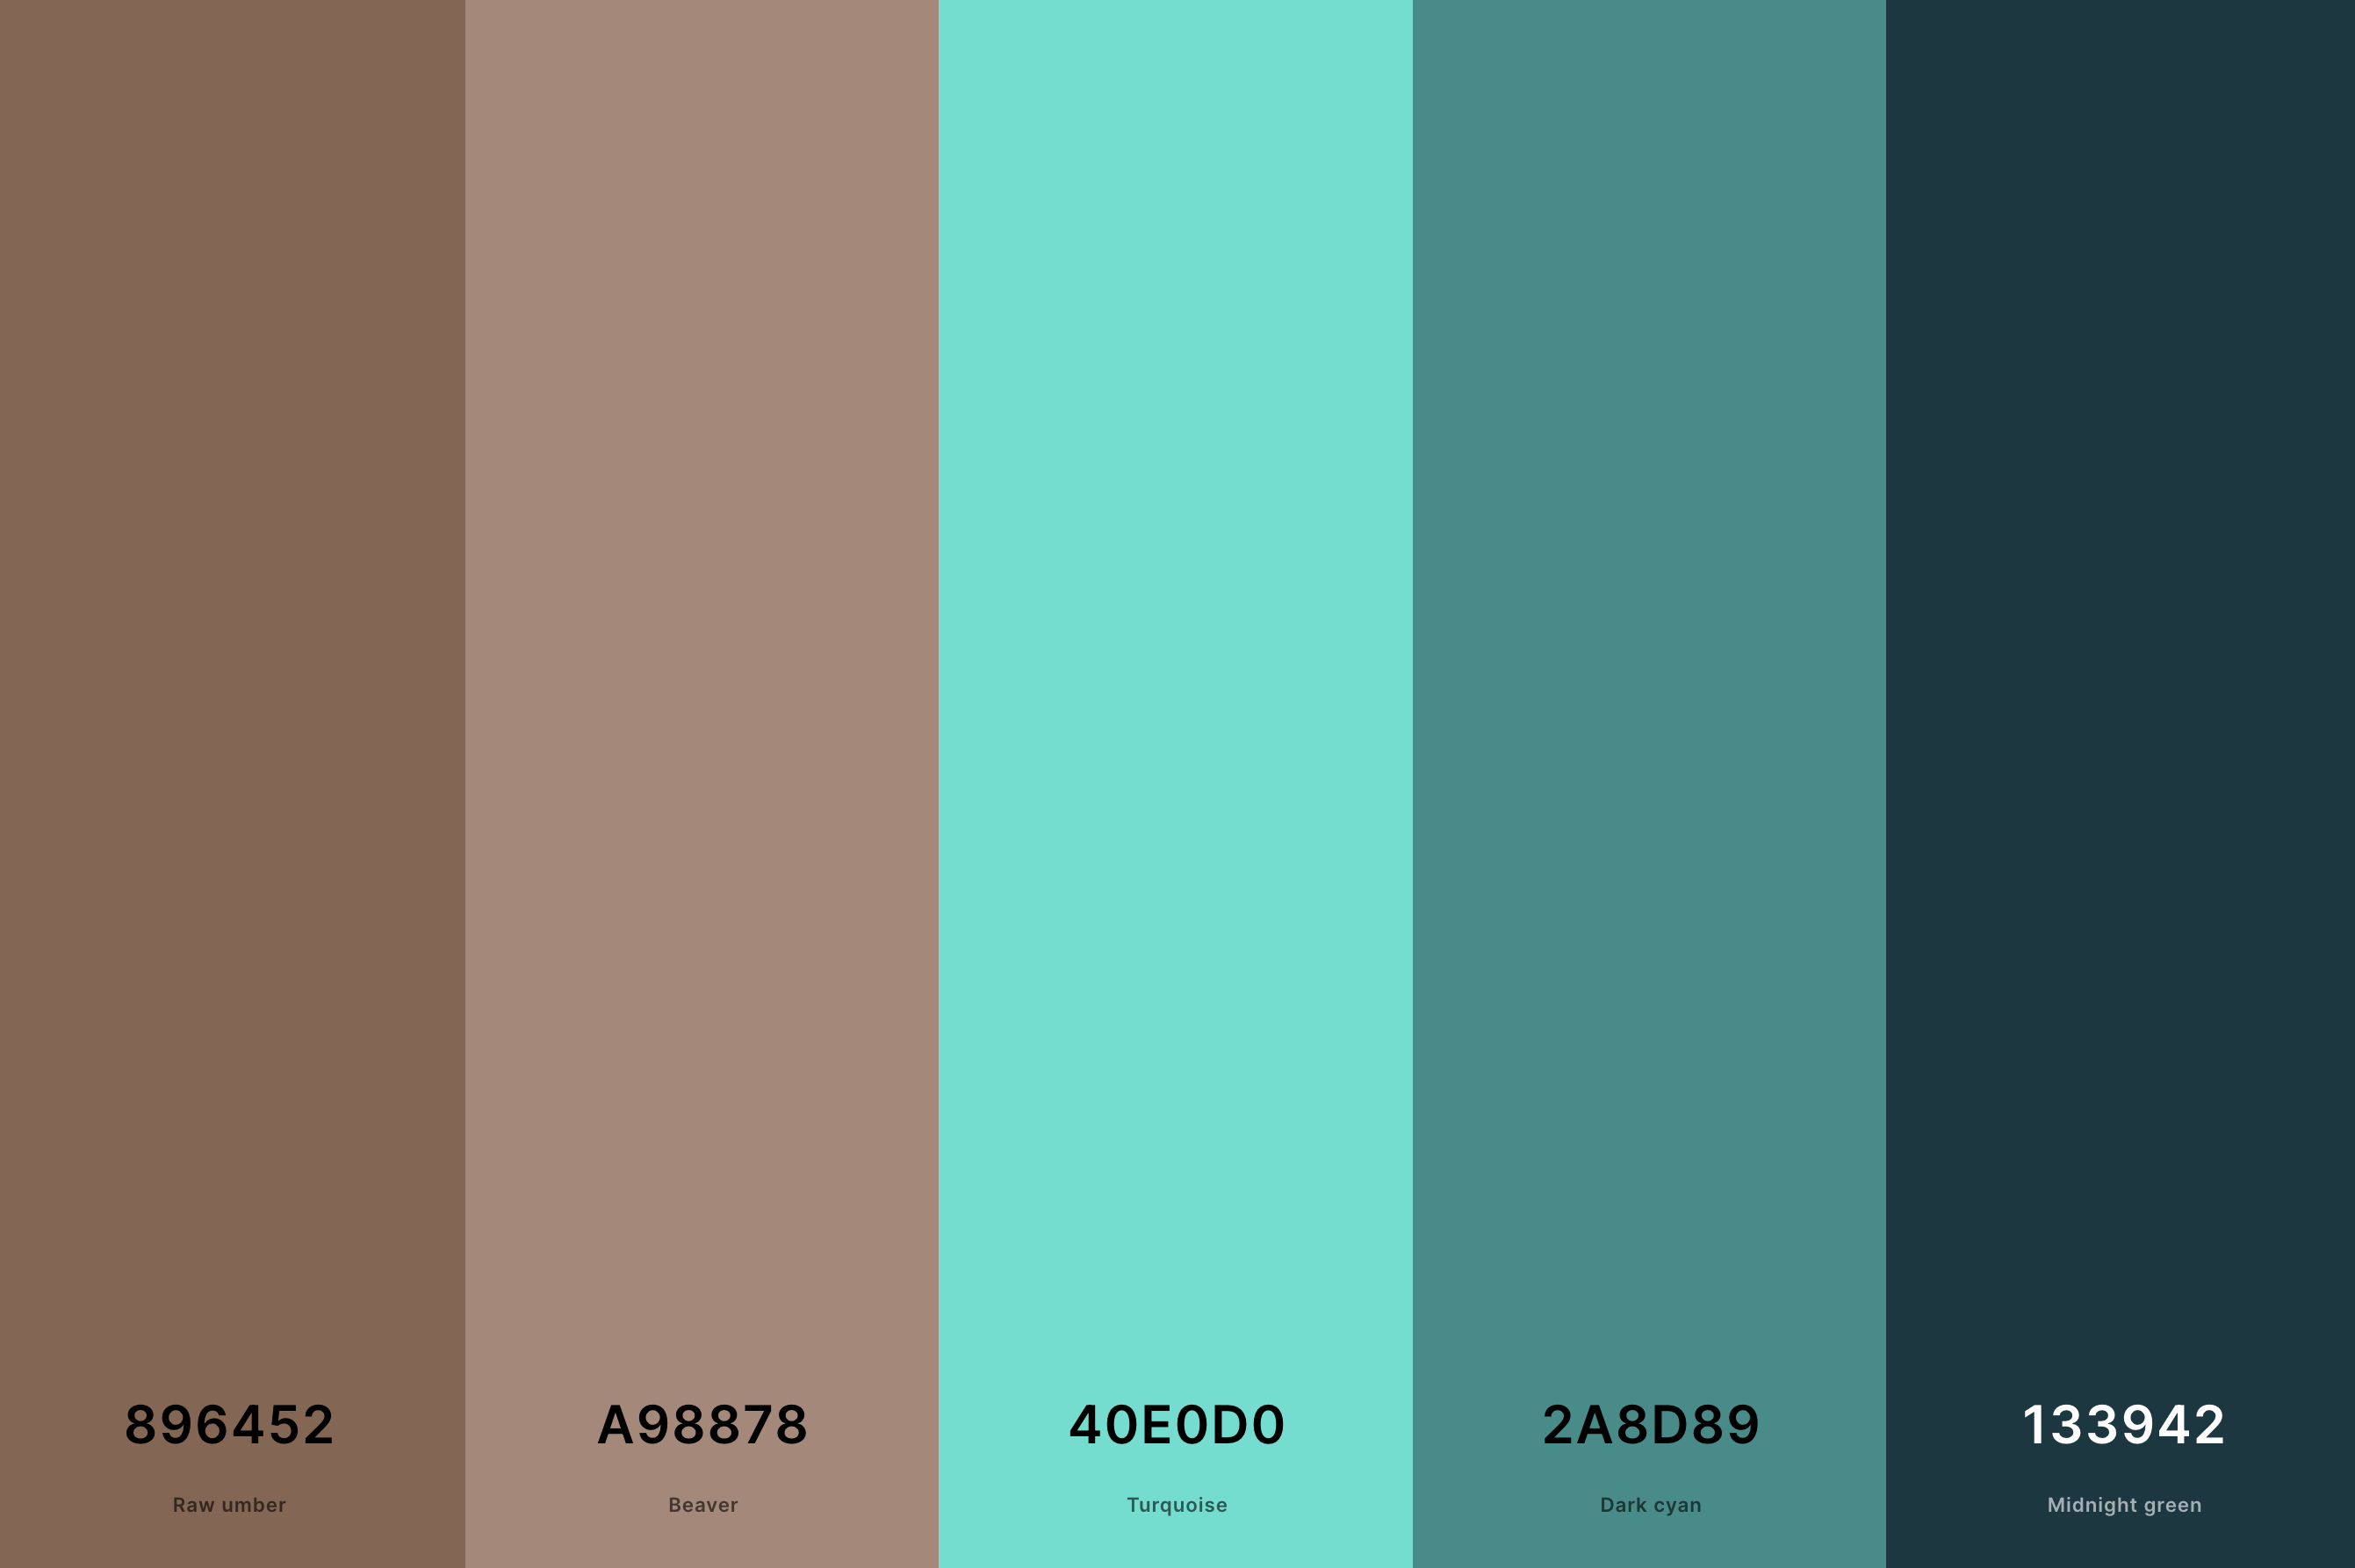 2. Turquoise And Brown Color Palette Color Palette with Raw Umber (Hex #896452) + Beaver (Hex #A98878) + Turquoise (Hex #40E0D0) + Dark Cyan (Hex #2A8D89) + Midnight Green (Hex #133942) Color Palette with Hex Codes